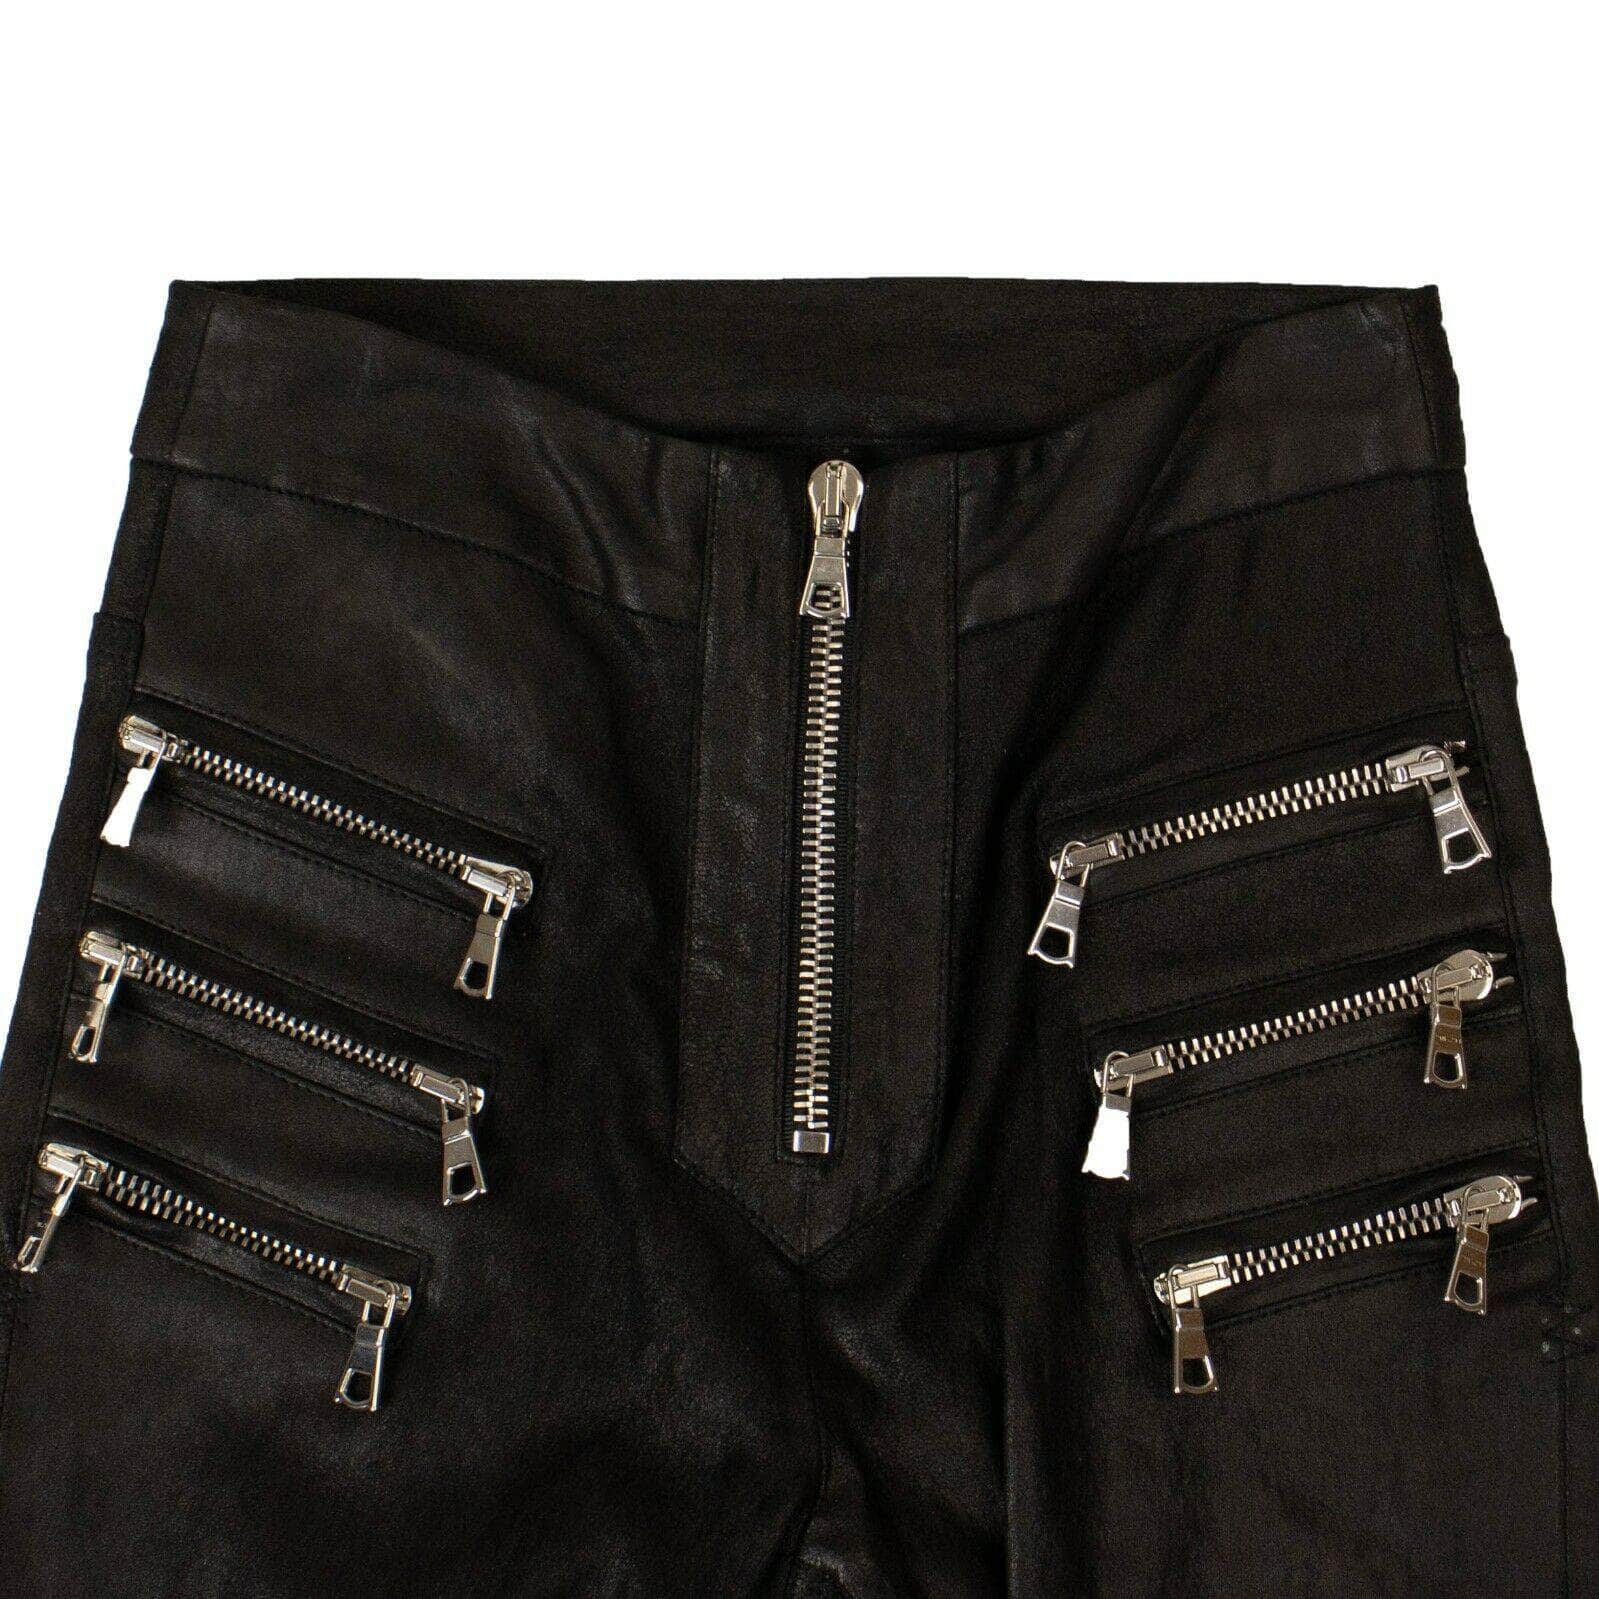 UNRAVEL PROJECT 500-750, channelenable-all, couponcollection, gender-womens, main-clothing, sale-enable, size-26, unravel-project, womens-skinny-pants 26 Black Leather Slim Biker Pants 82NGG-UN-92/26 82NGG-UN-92/26